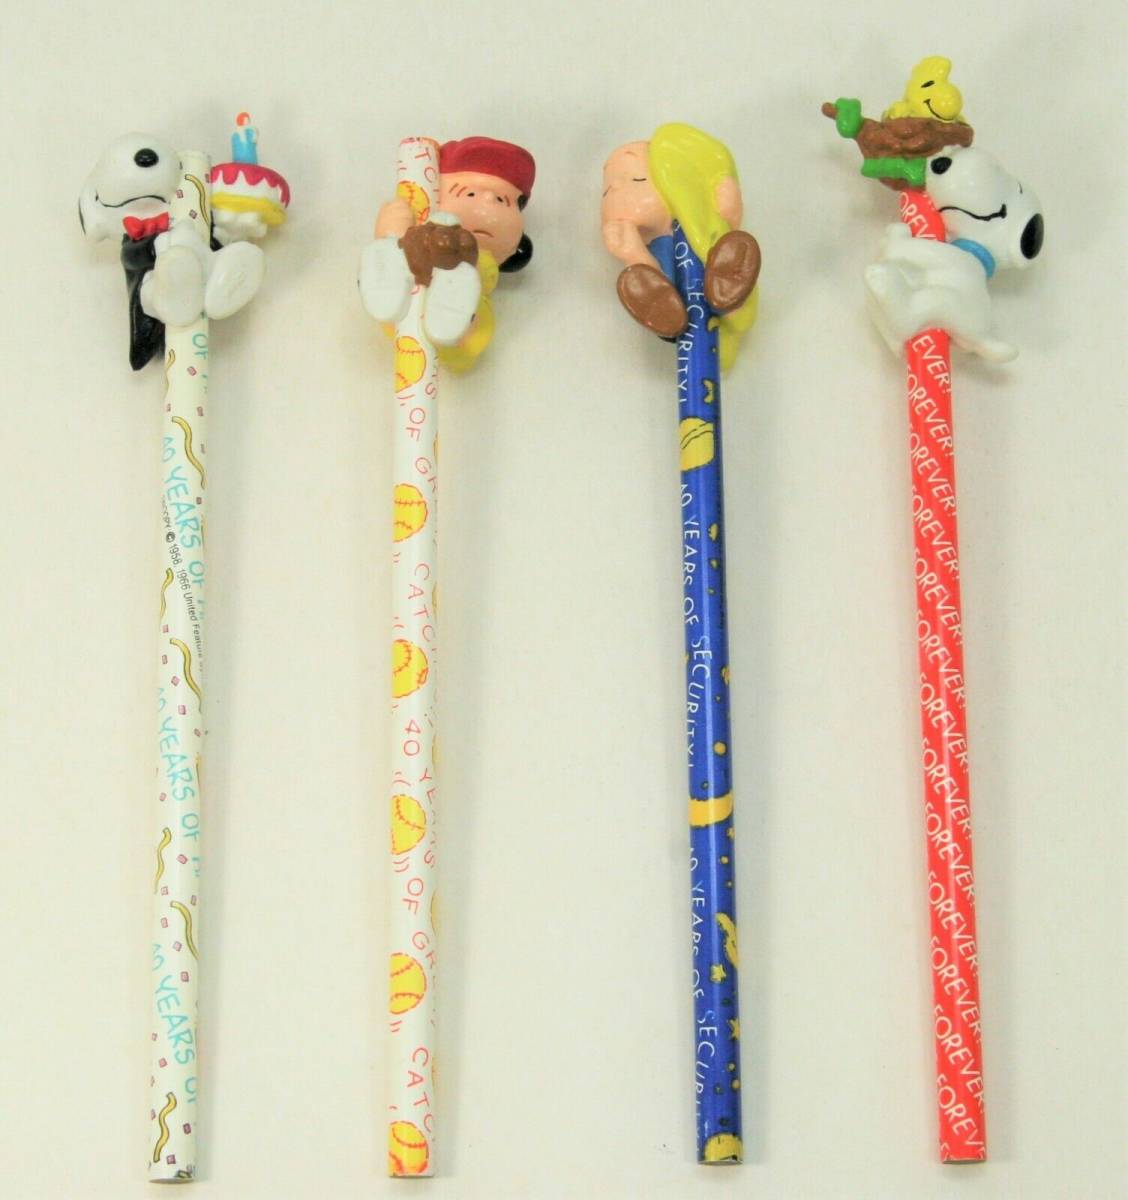 Peanuts Snoopy "40 Years..." Anniversary Pencil PVC Toppers Set of 4, 1990, Rare 海外 即決